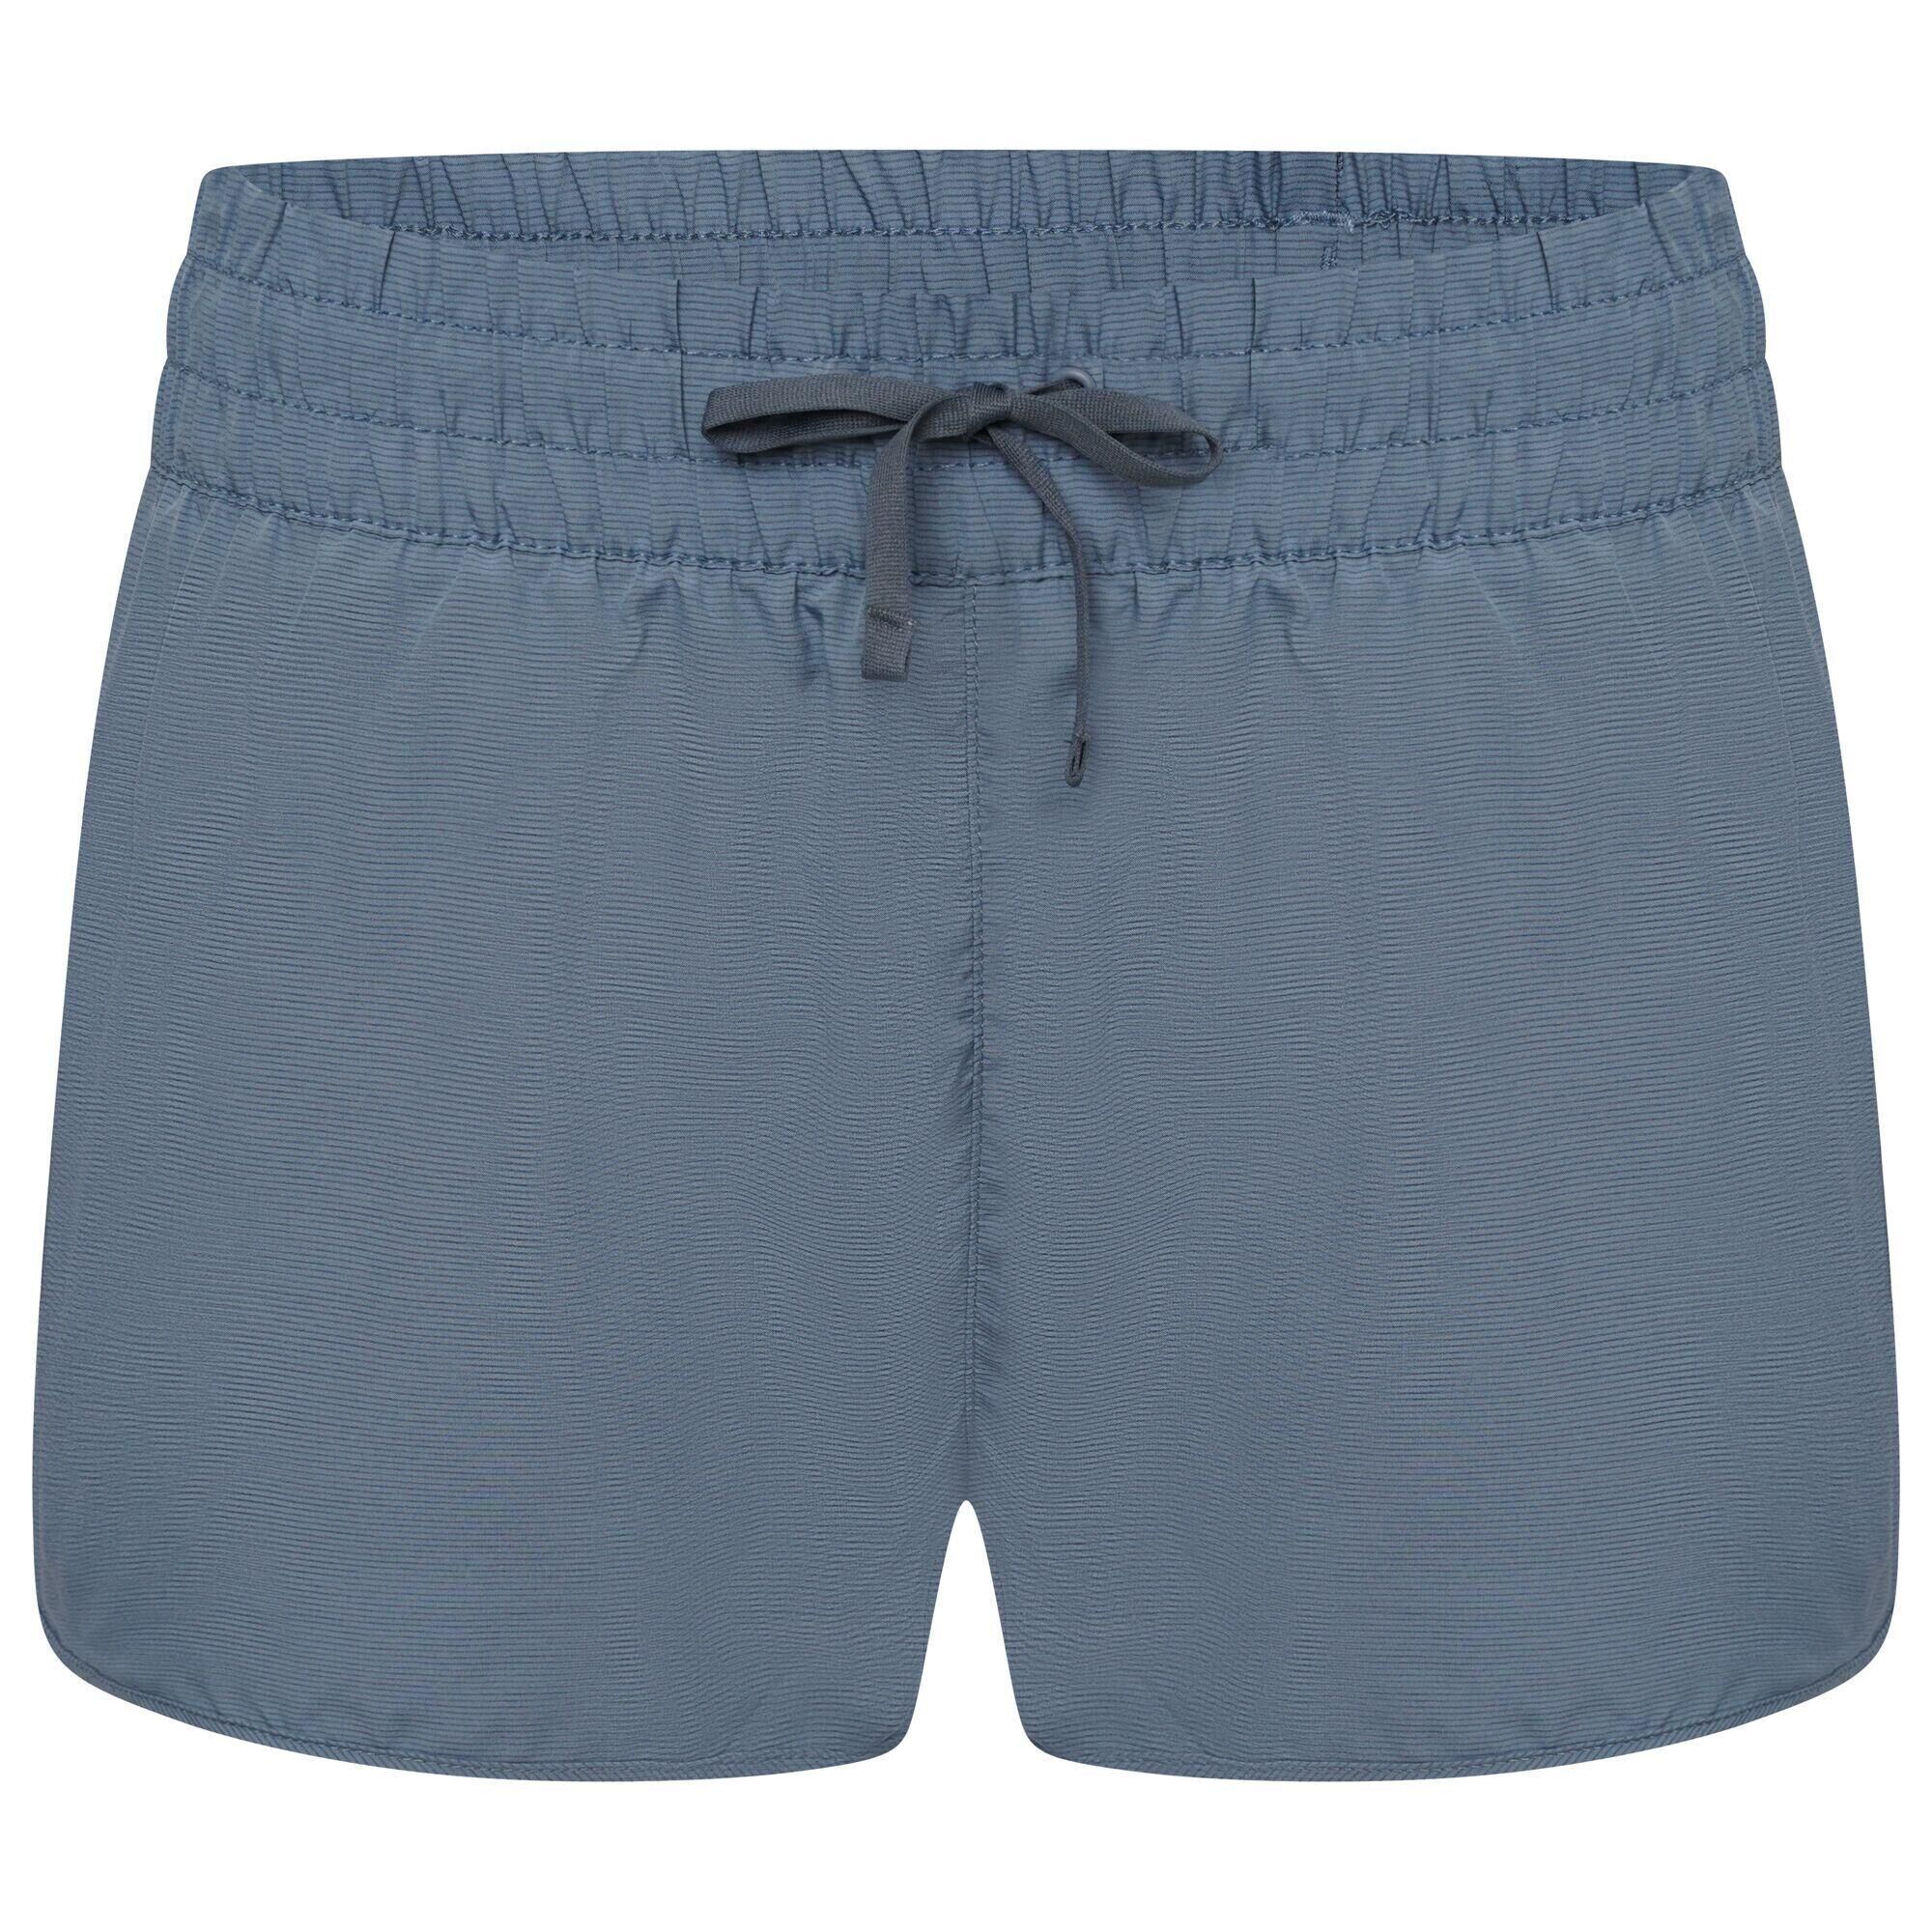 DARE 2B Womens/Ladies The Laura Whitmore Edit Sprint Up 2 in 1 Shorts (Bluestone/Orion